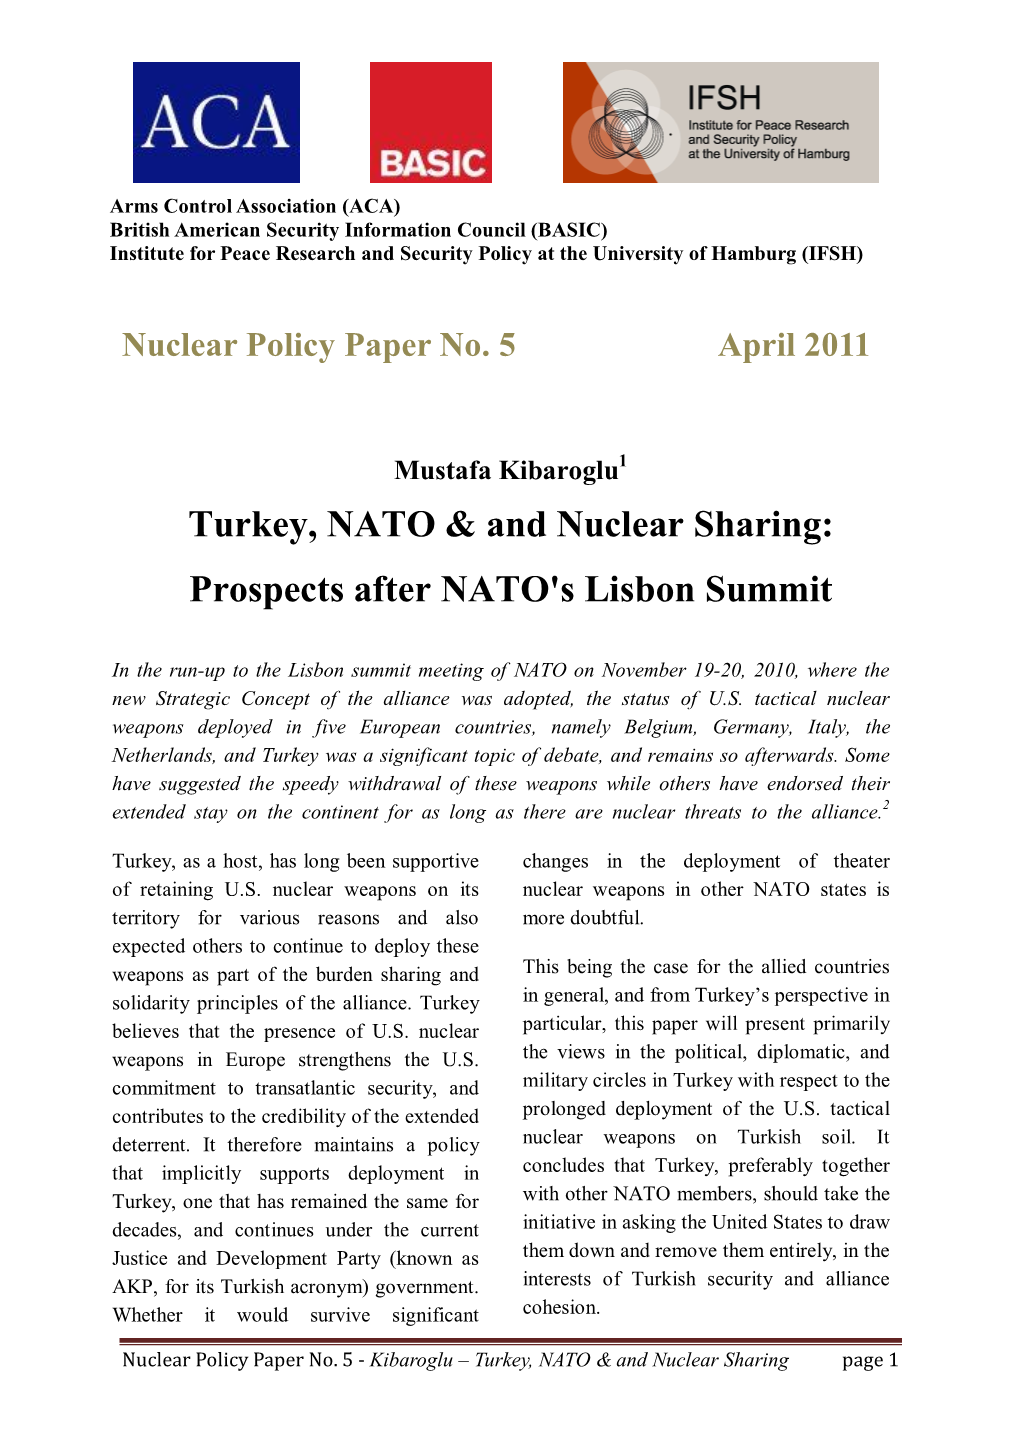 Turkey, NATO & and Nuclear Sharing